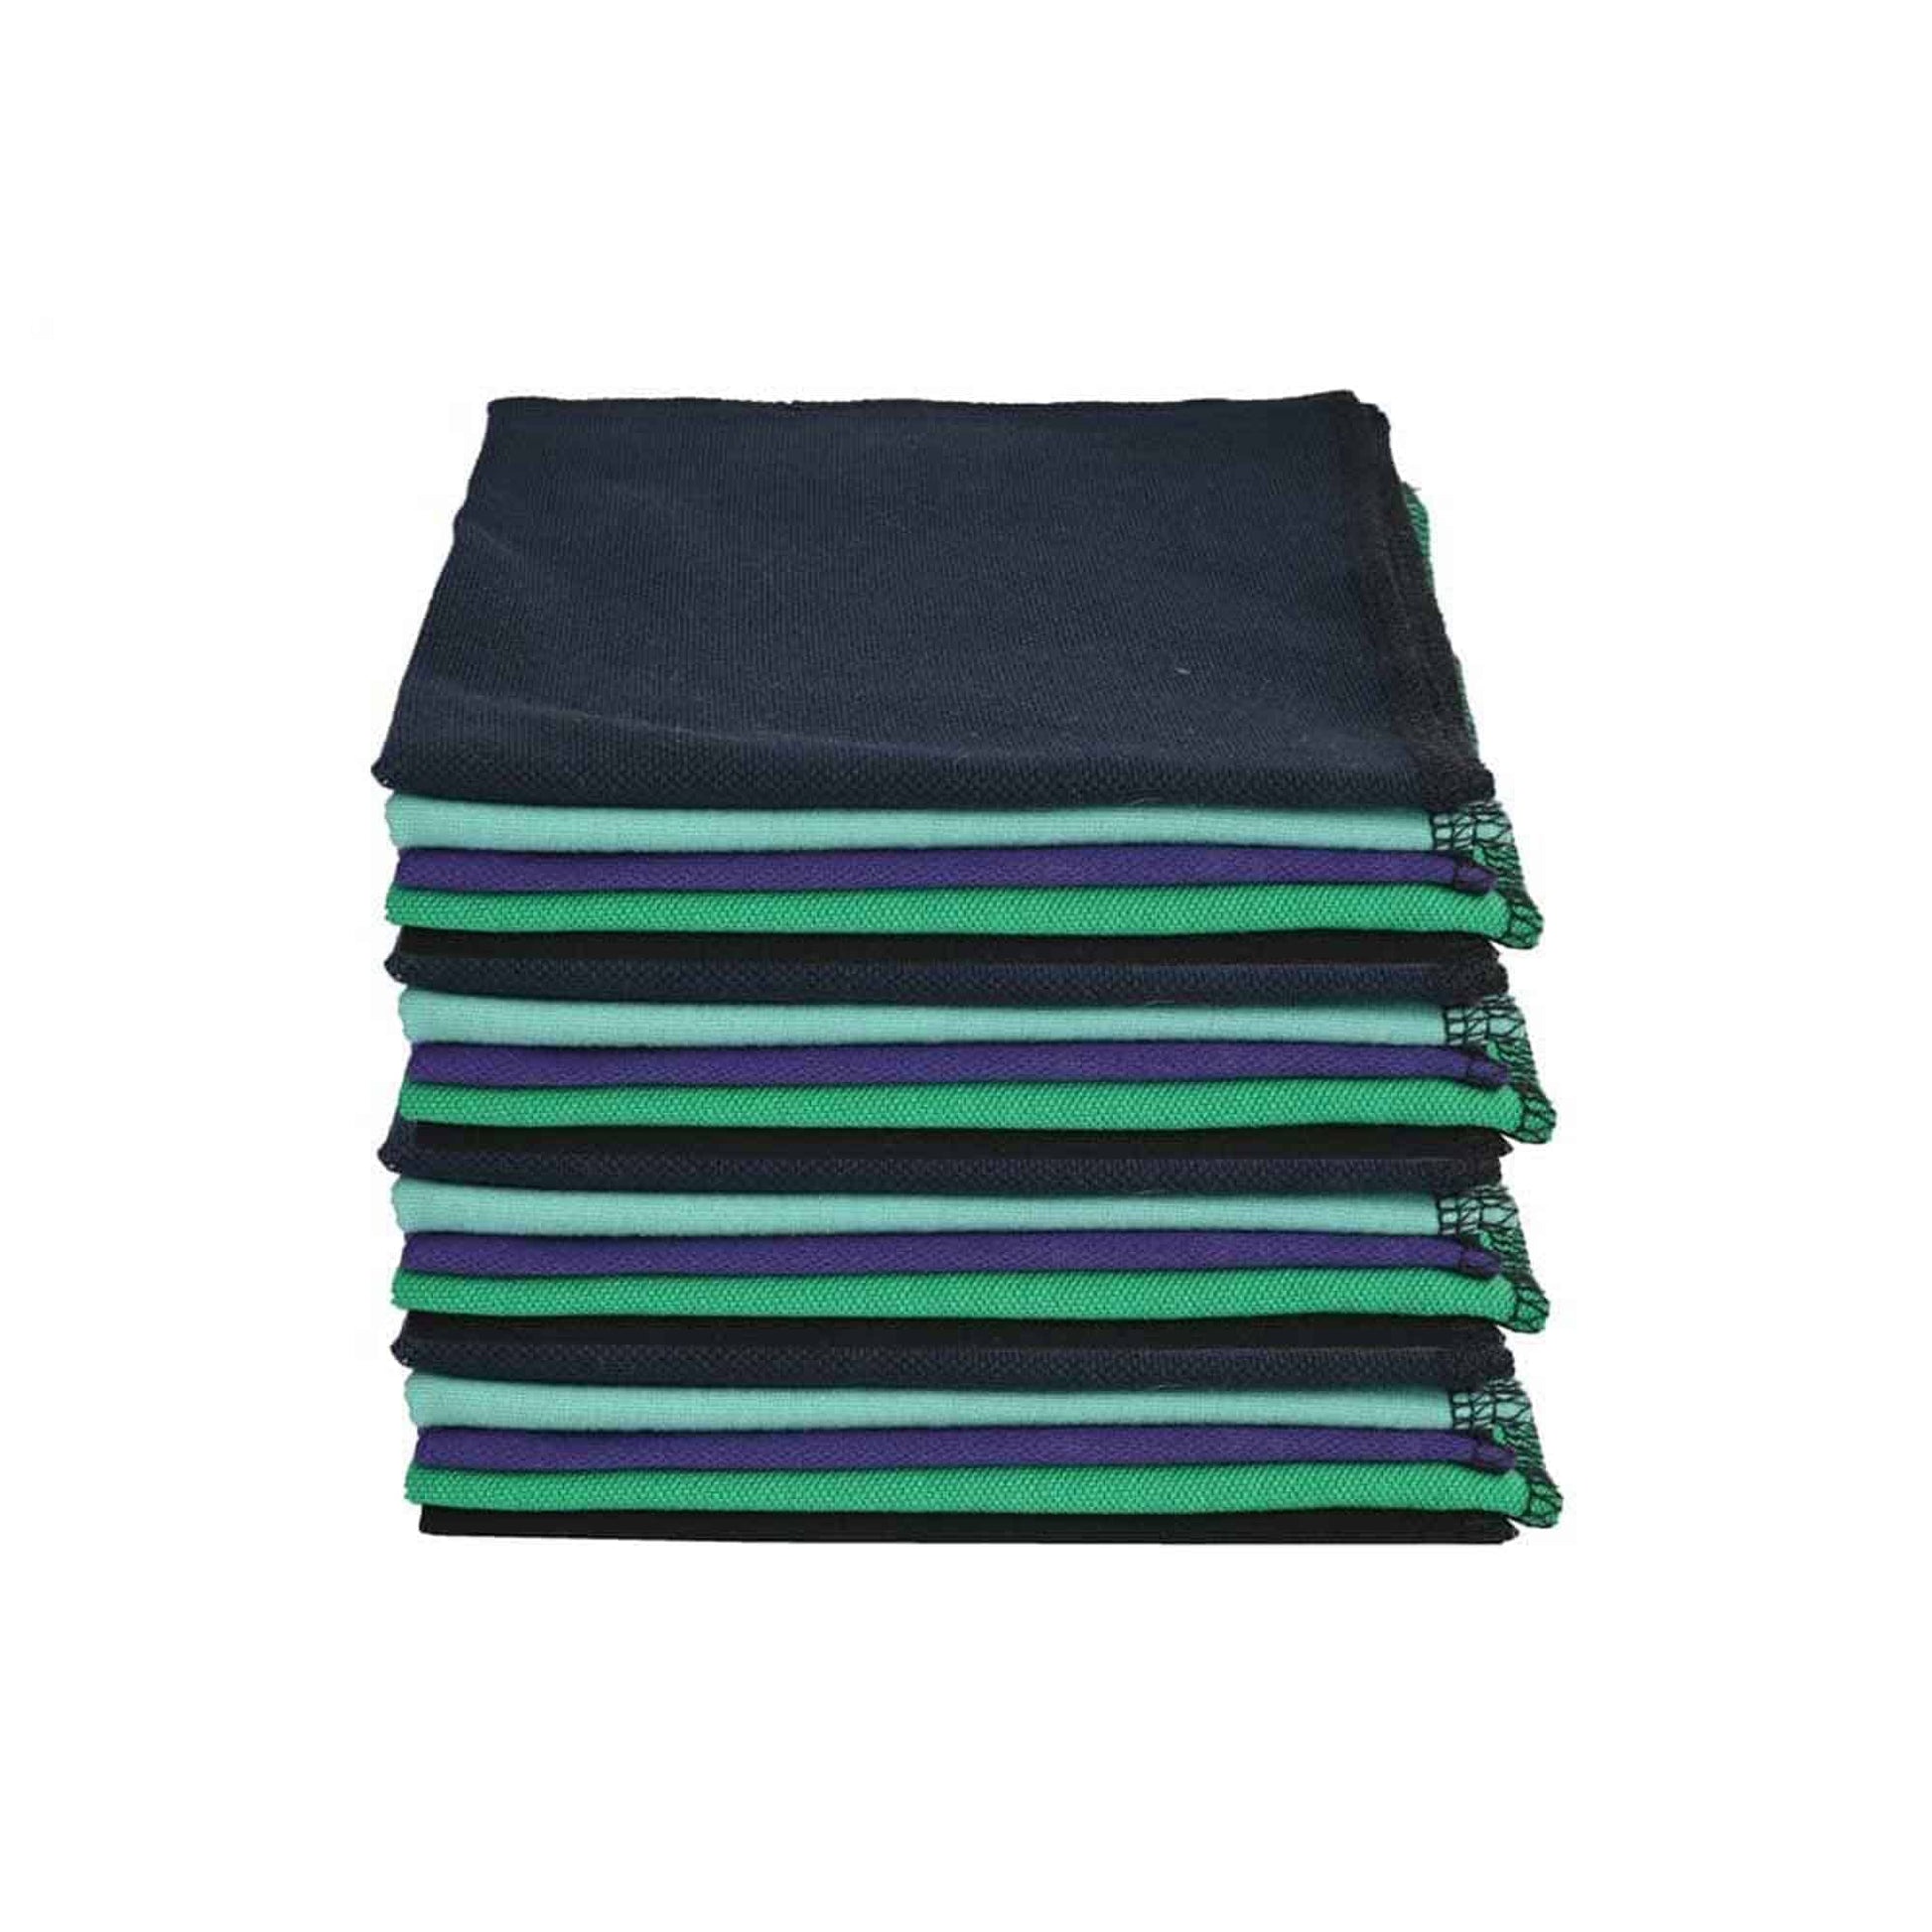 Polo Republica Cleaning Cloth (13x13 inches) Cleaning Accessories Image Mix(Overlocked) Pack of 10 